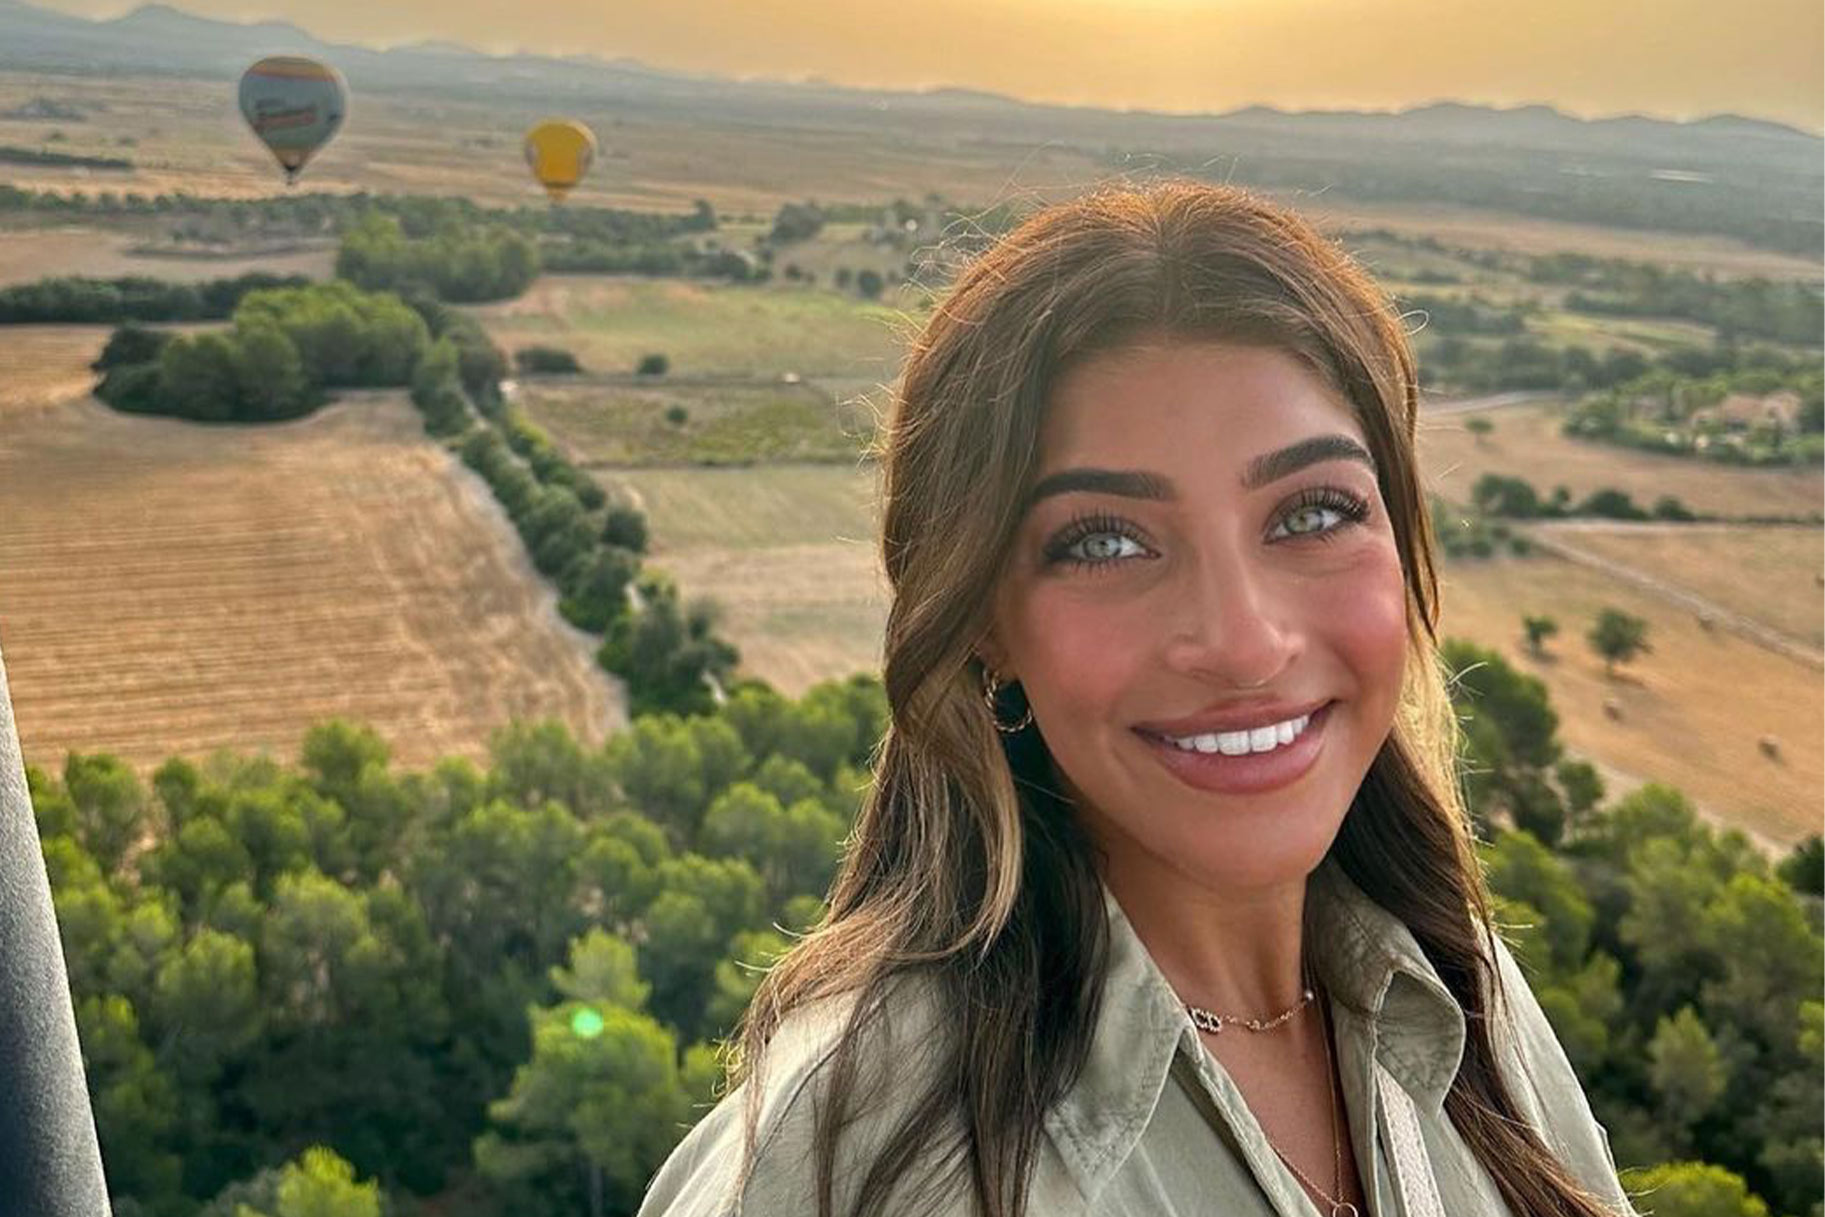 Gia Giudice smiling in a hot air balloon in Spain.